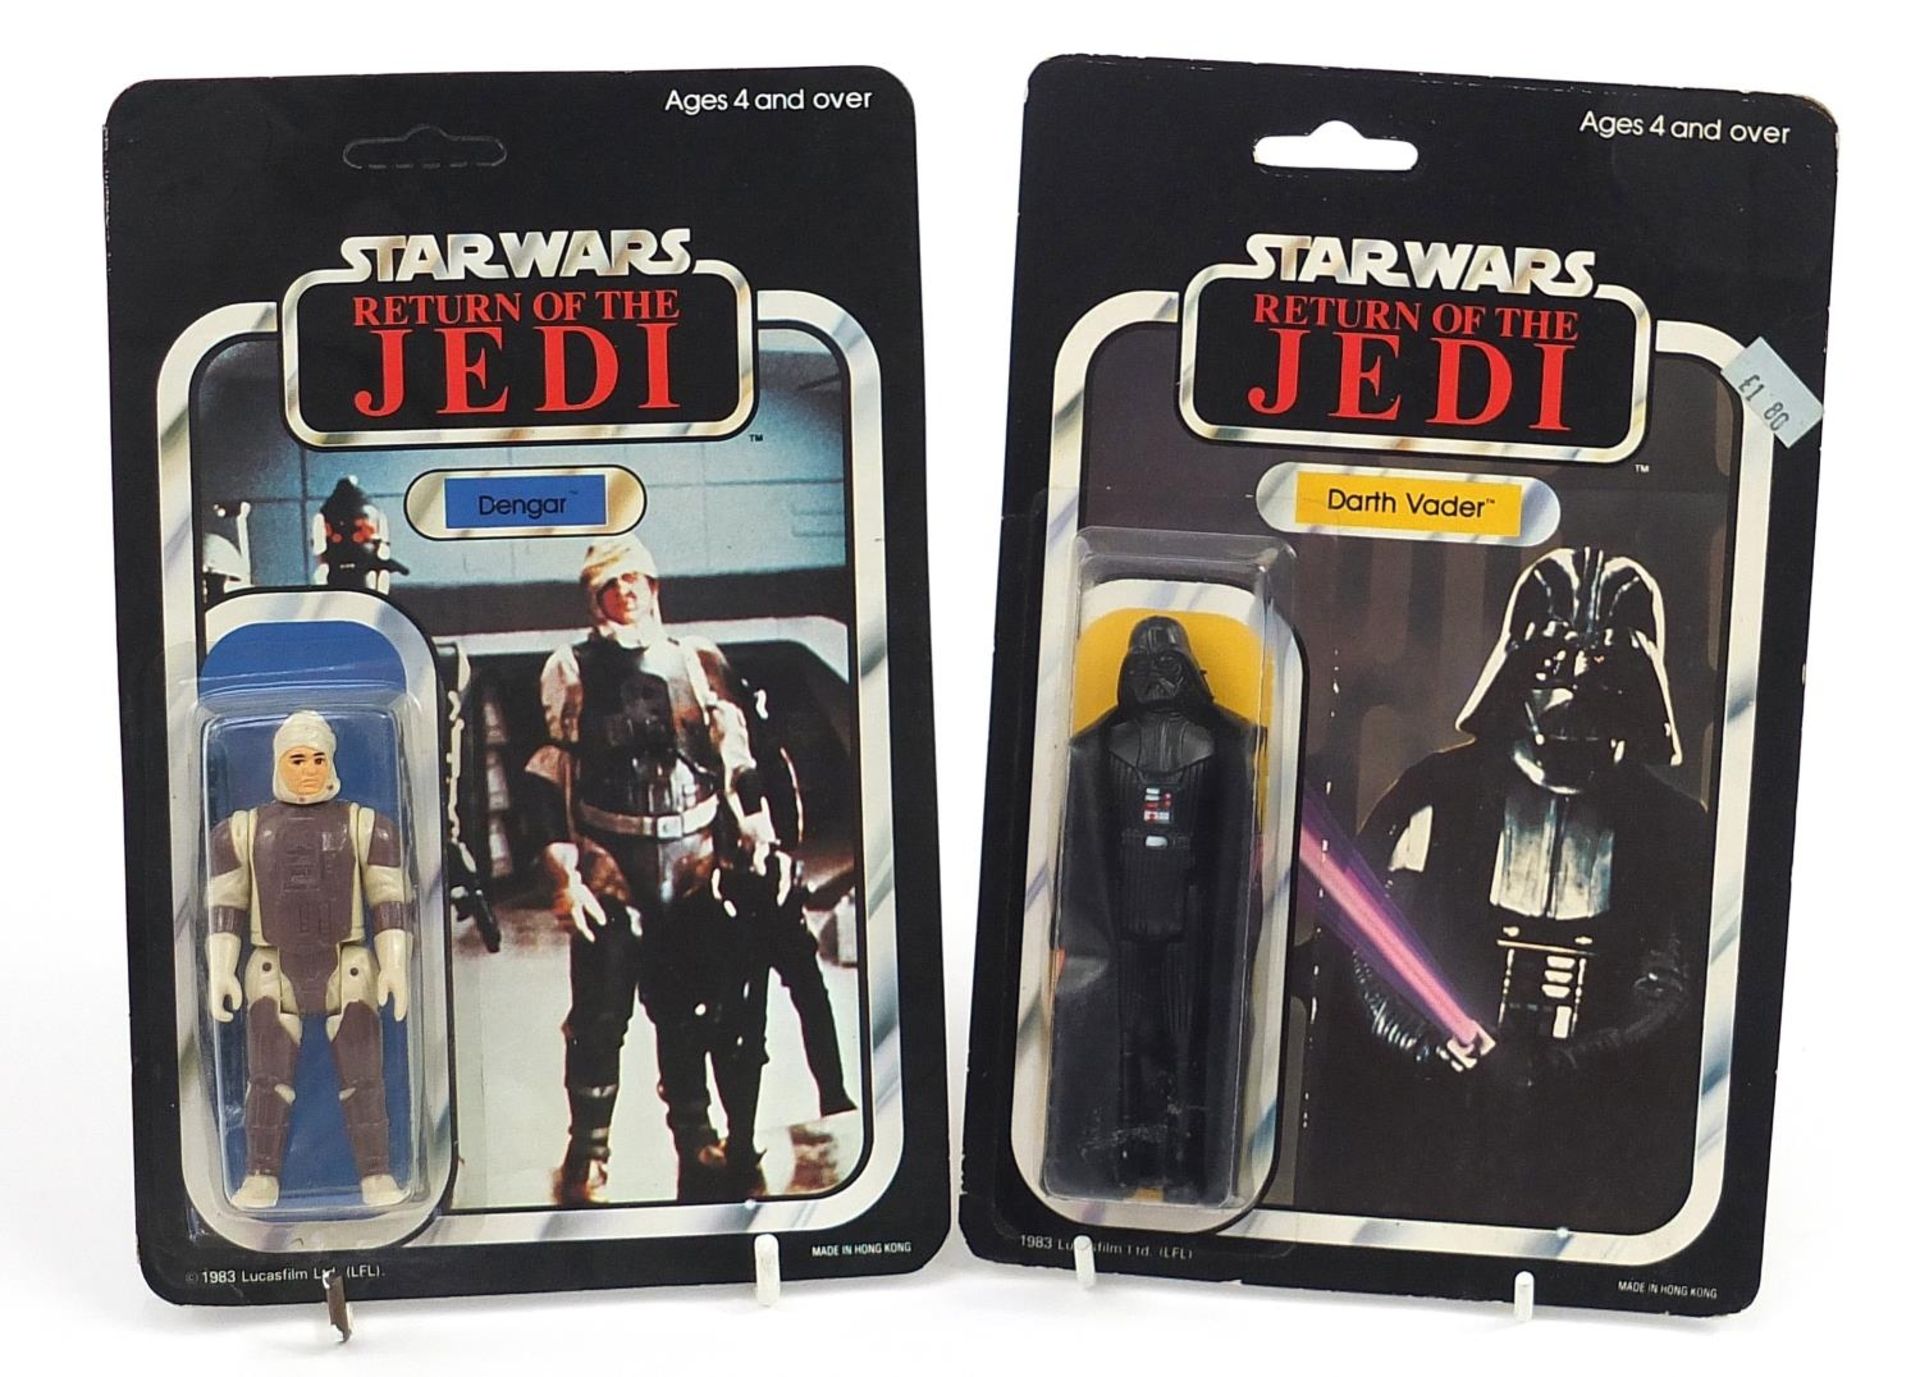 Two 1983 Star Wars Return of the Jedi figures housed in sealed blister packs including Darth Vader